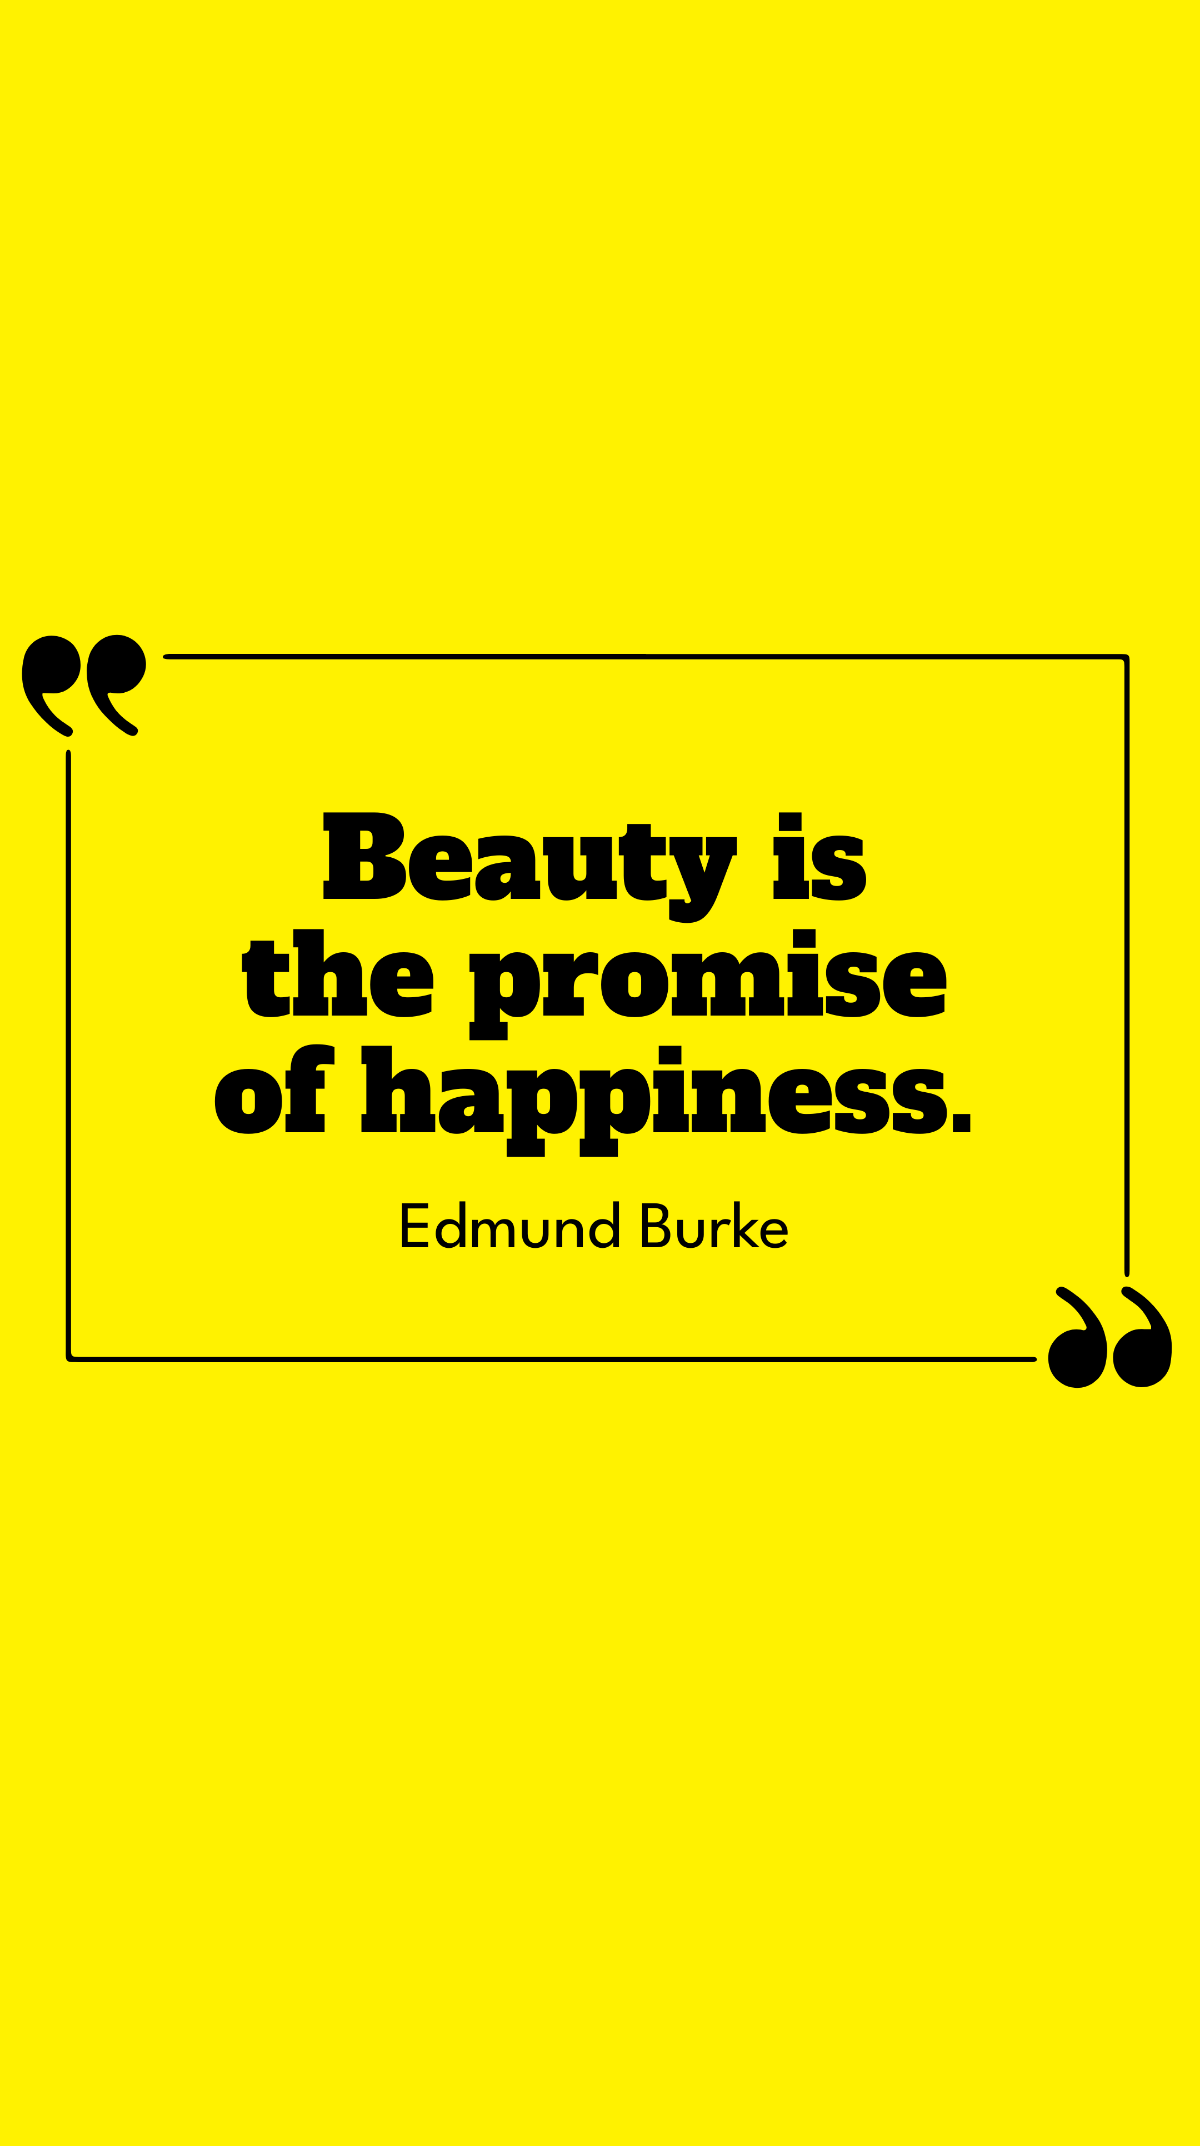 Edmund Burke - Beauty is the promise of happiness. Template